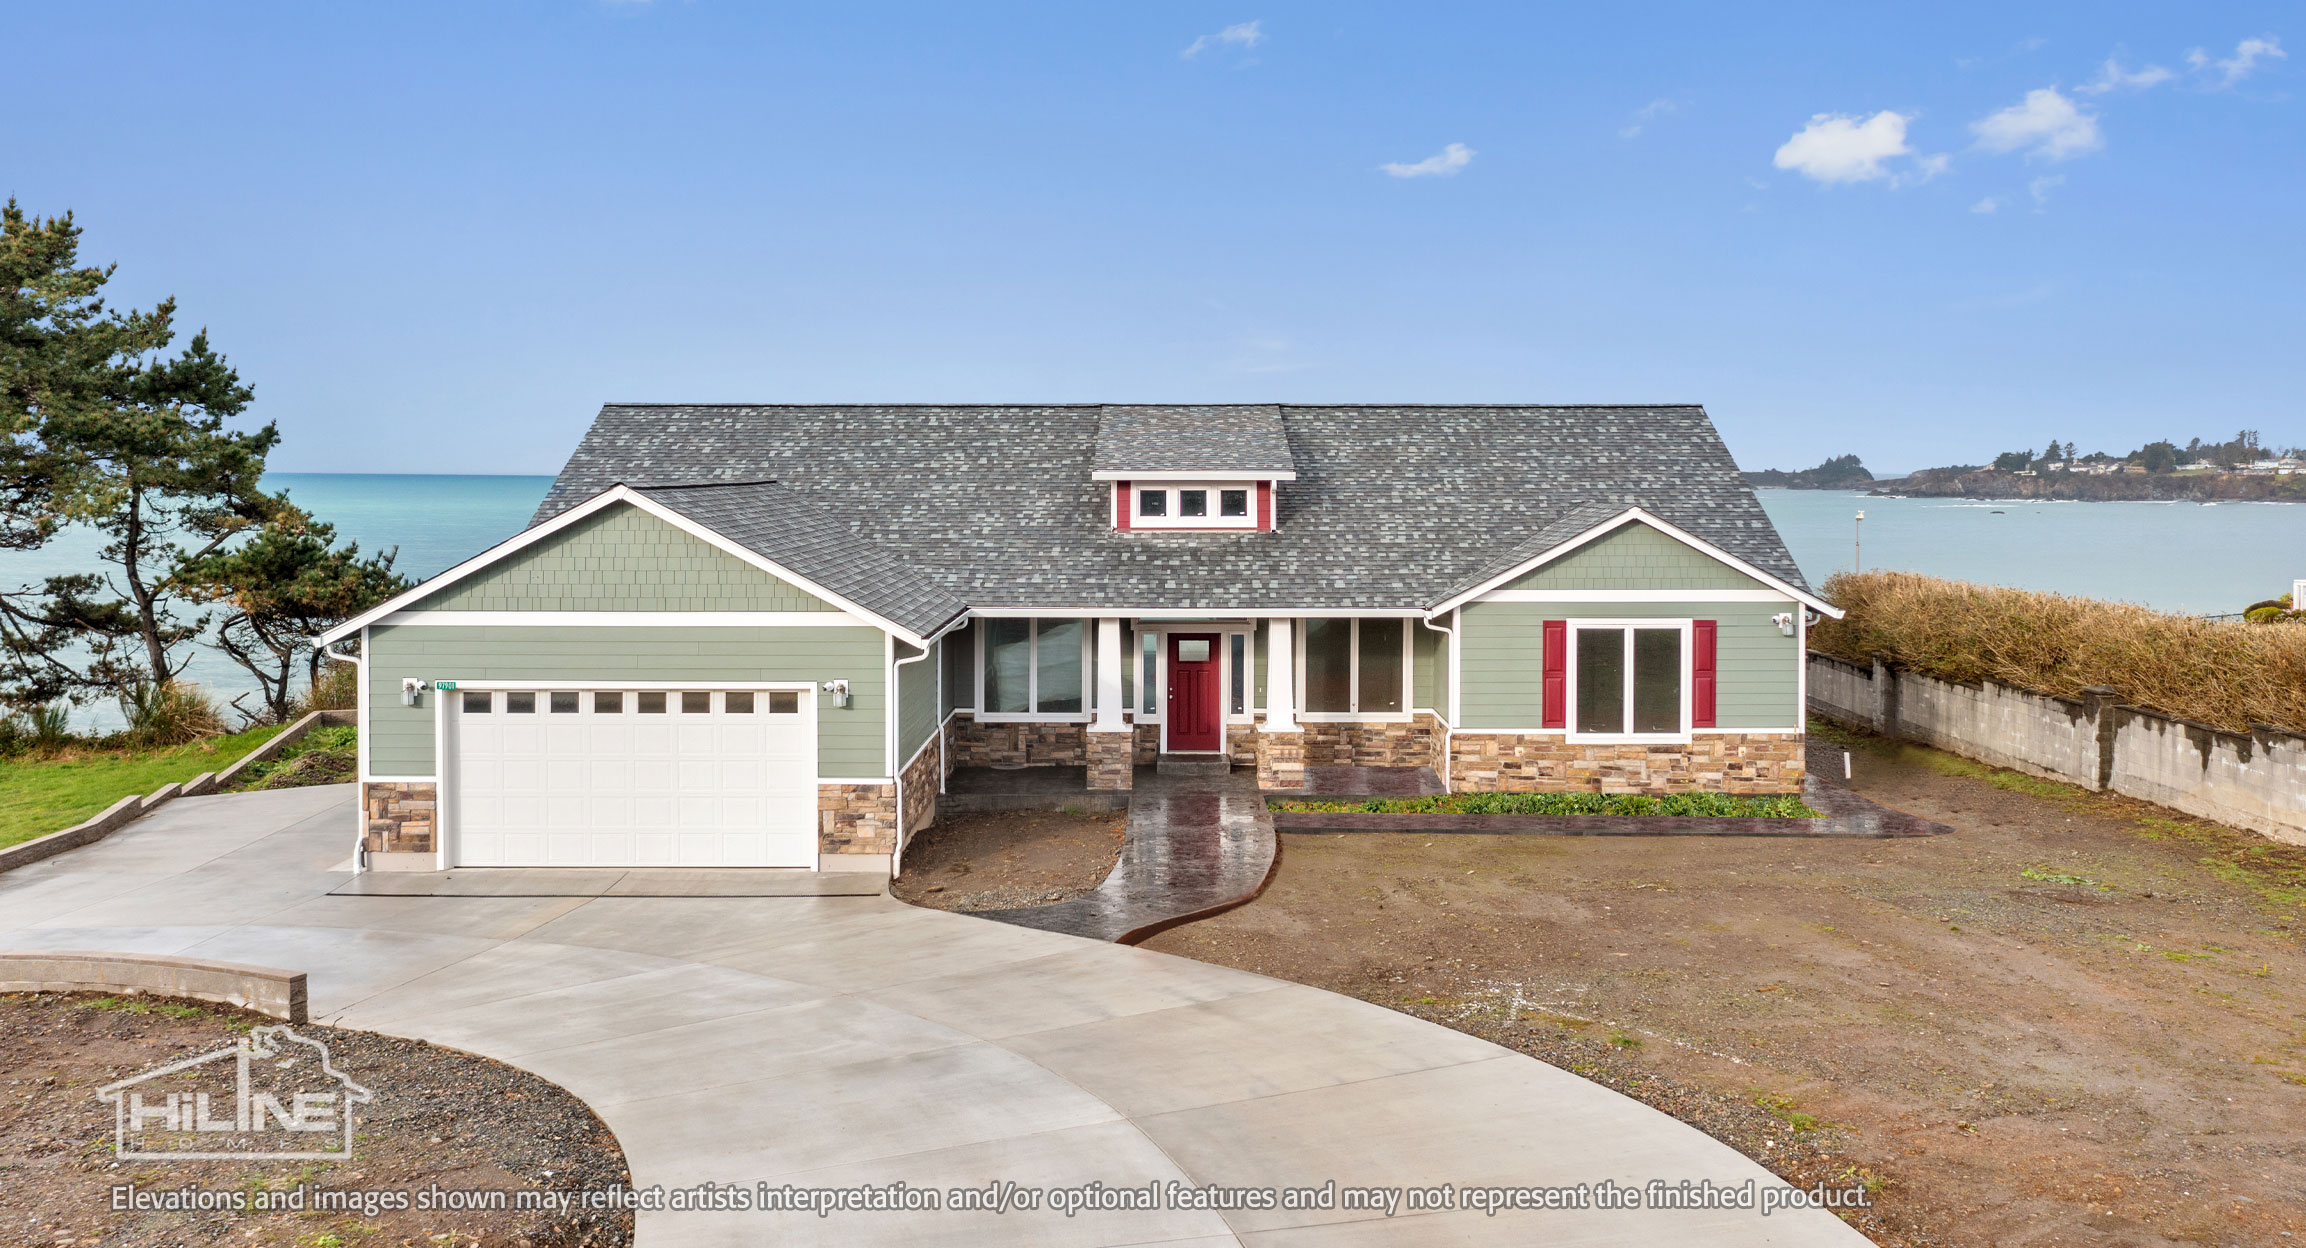 Image of HiLine Home Plan 2592 Front Exterior.